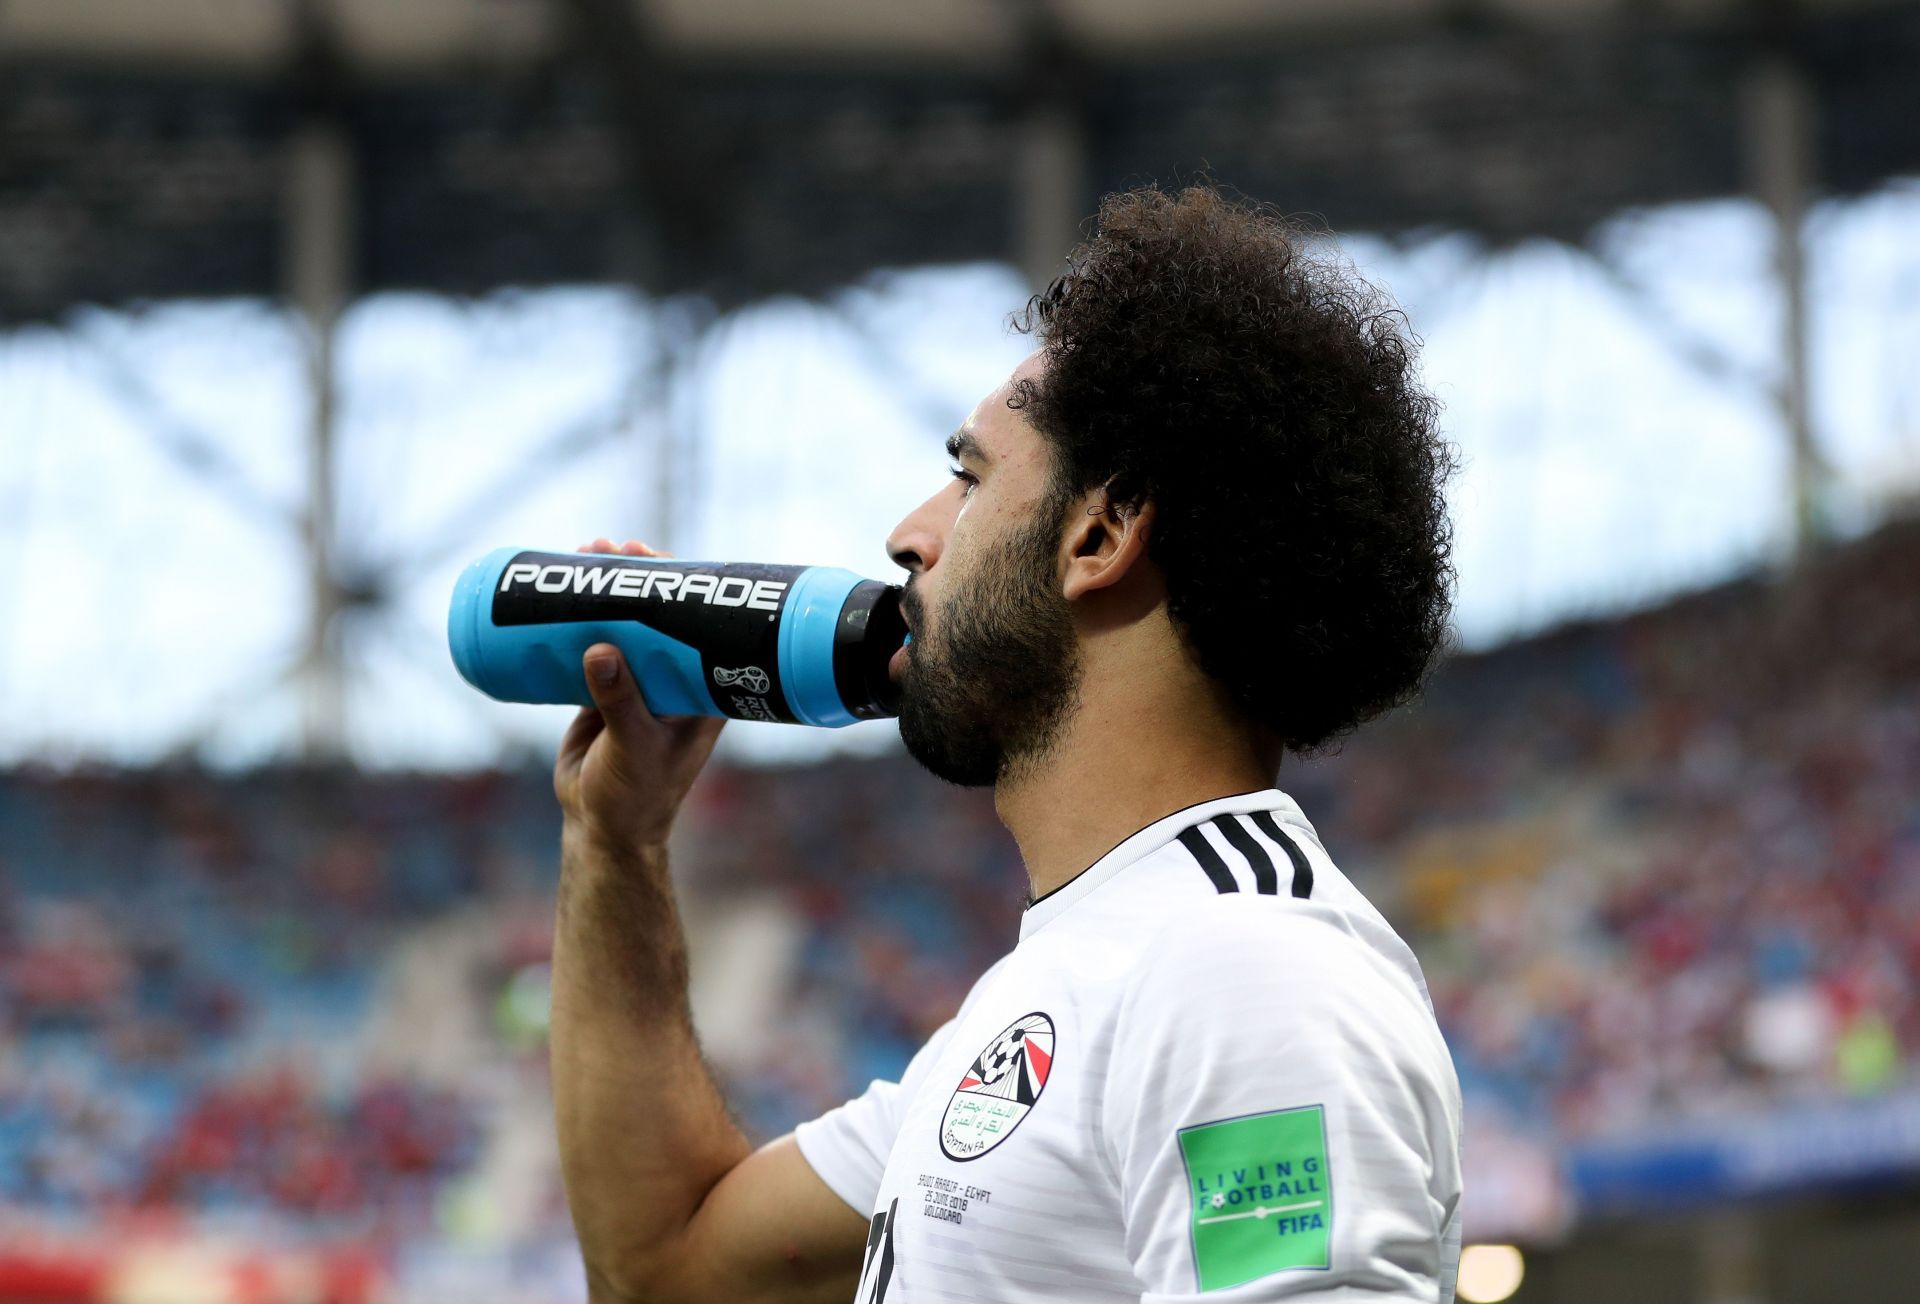 Mohamed Salah is yet to win an international trophy with Egypt